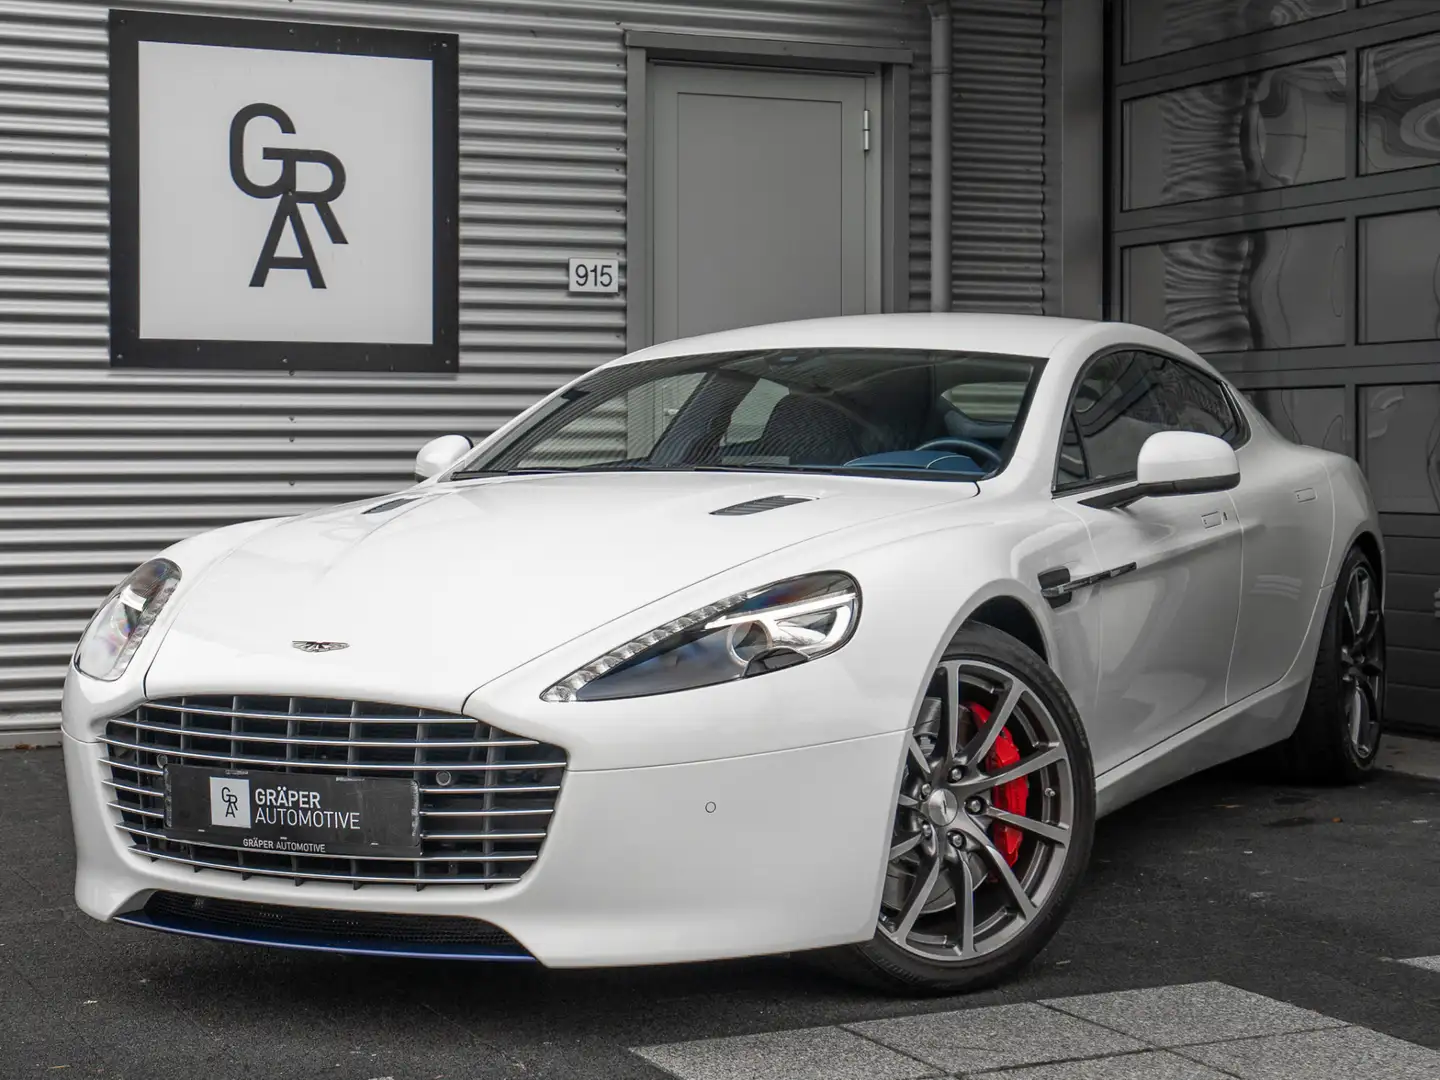 Aston Martin Rapide S 6.0 V12 ‘Britain is Great’ Edition by Q 1/8 Білий - 1